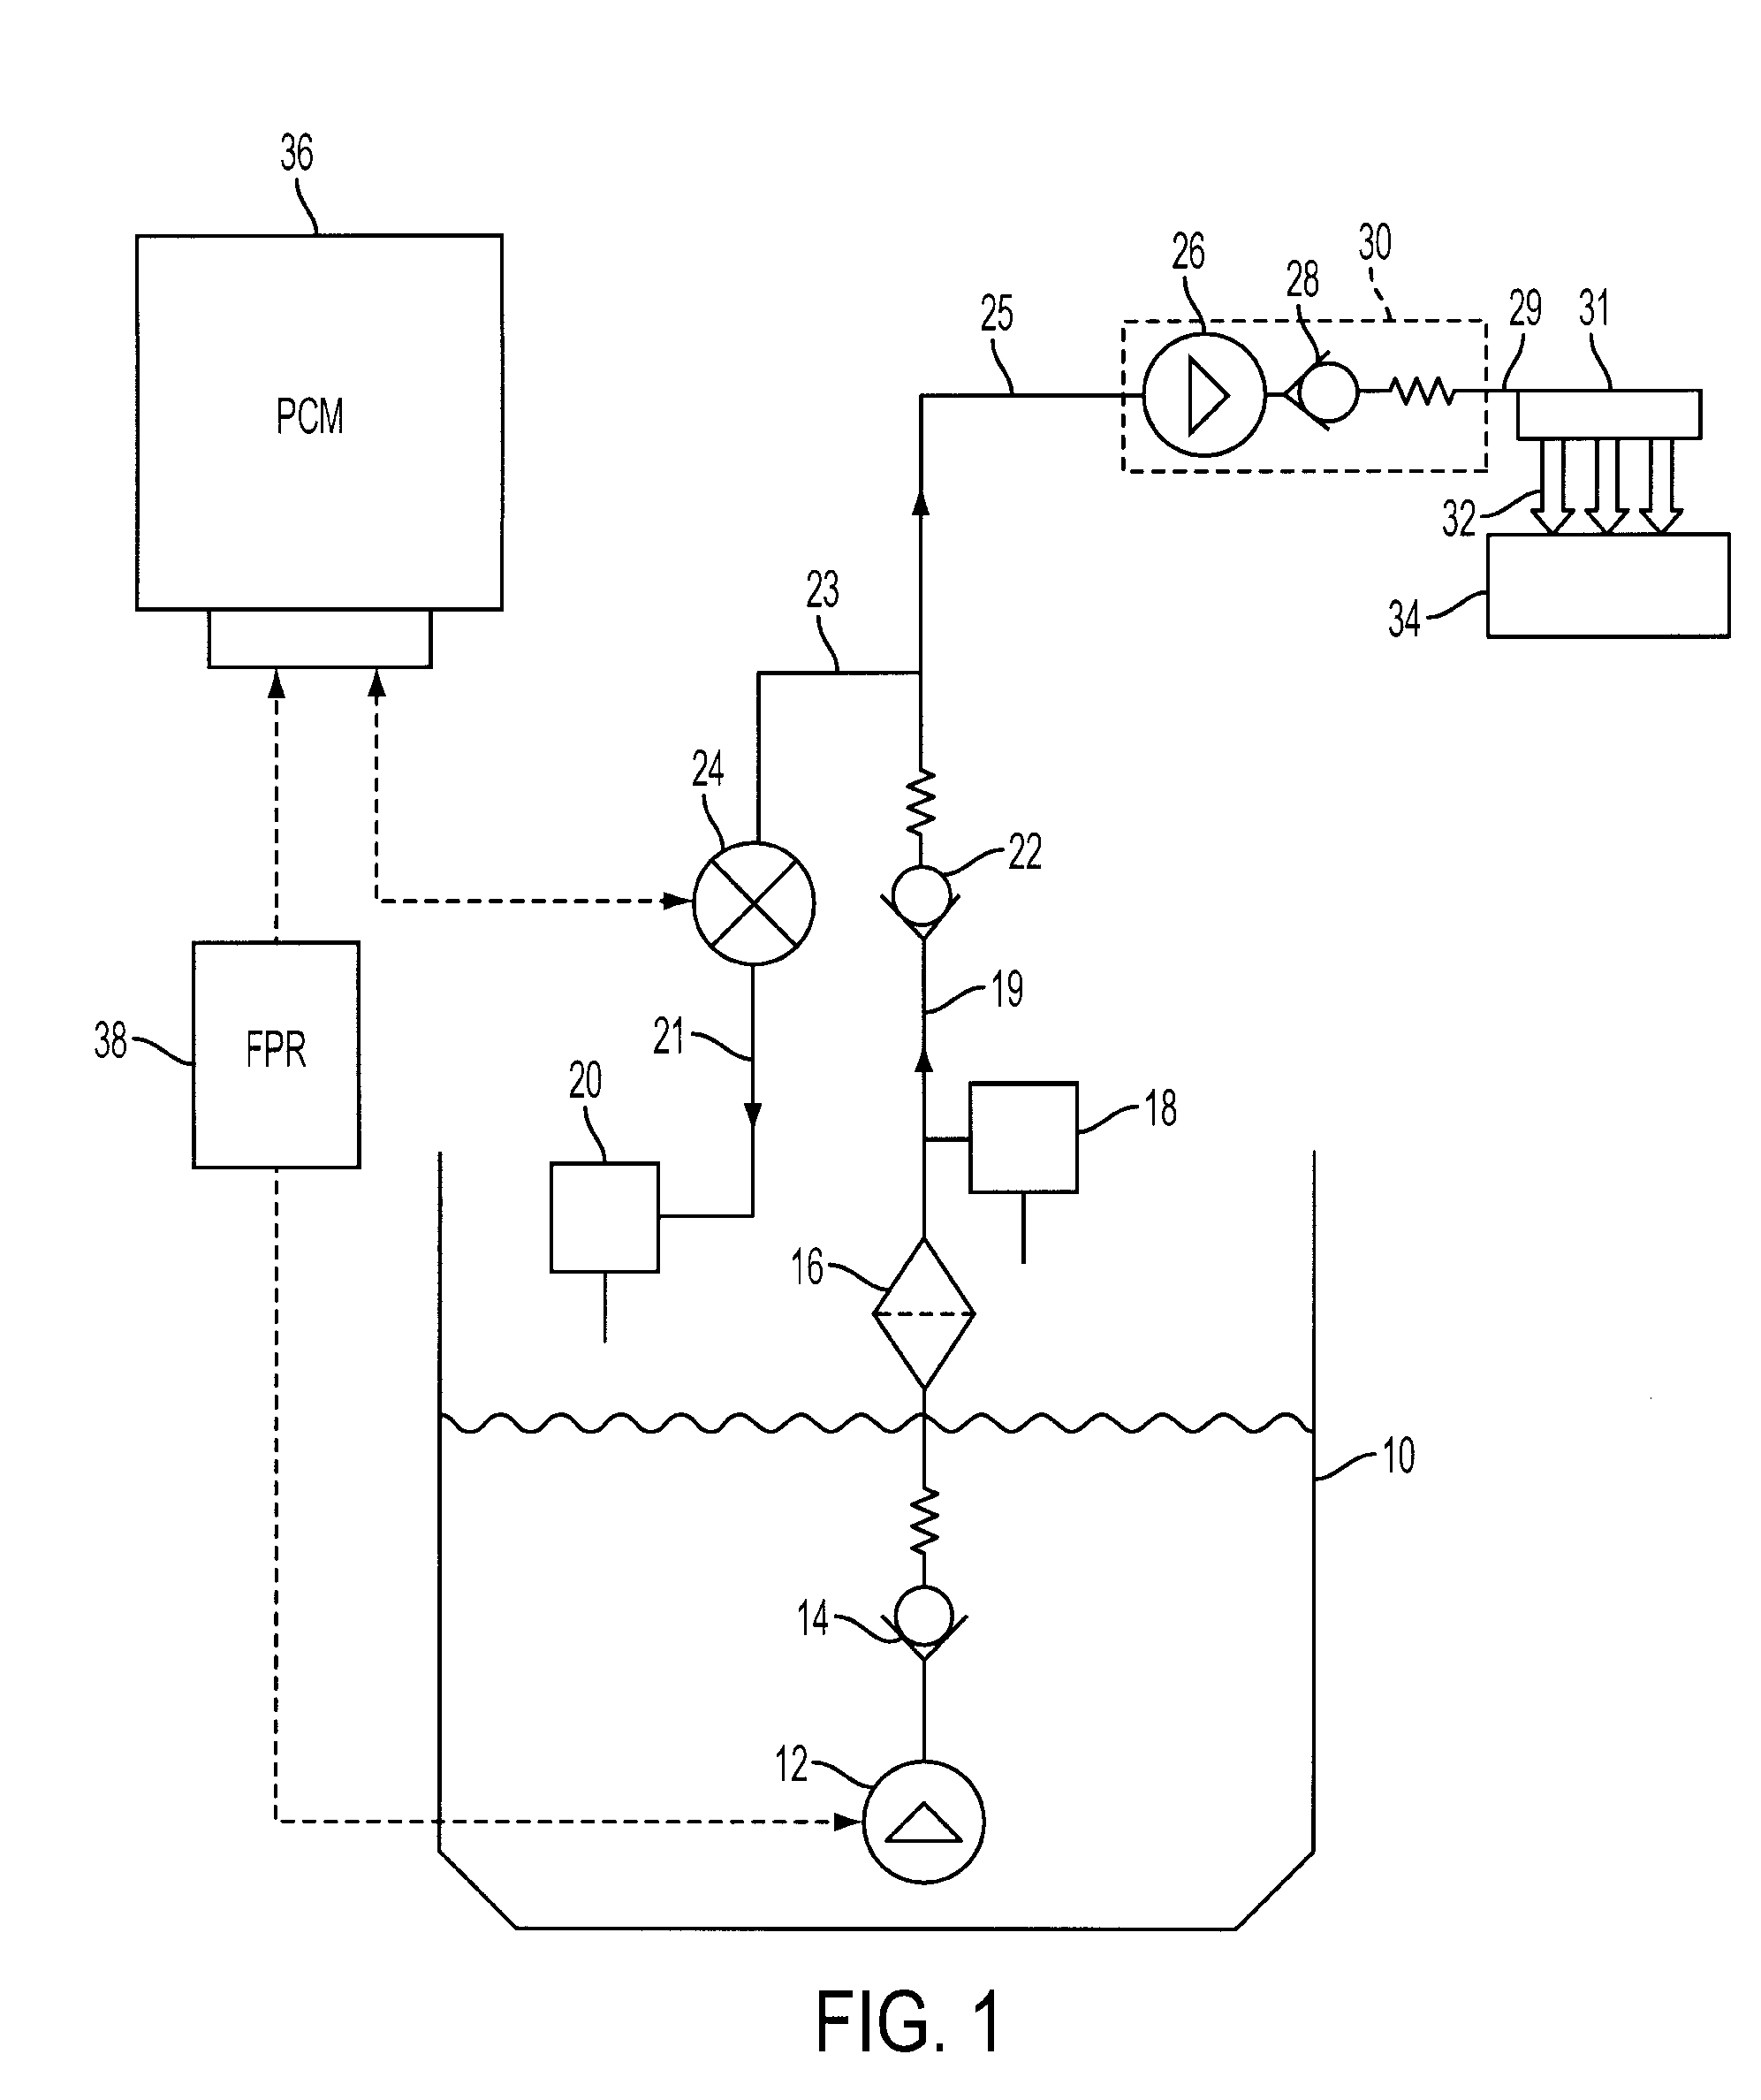 Direct injection fuel system utilizing water hammer effect